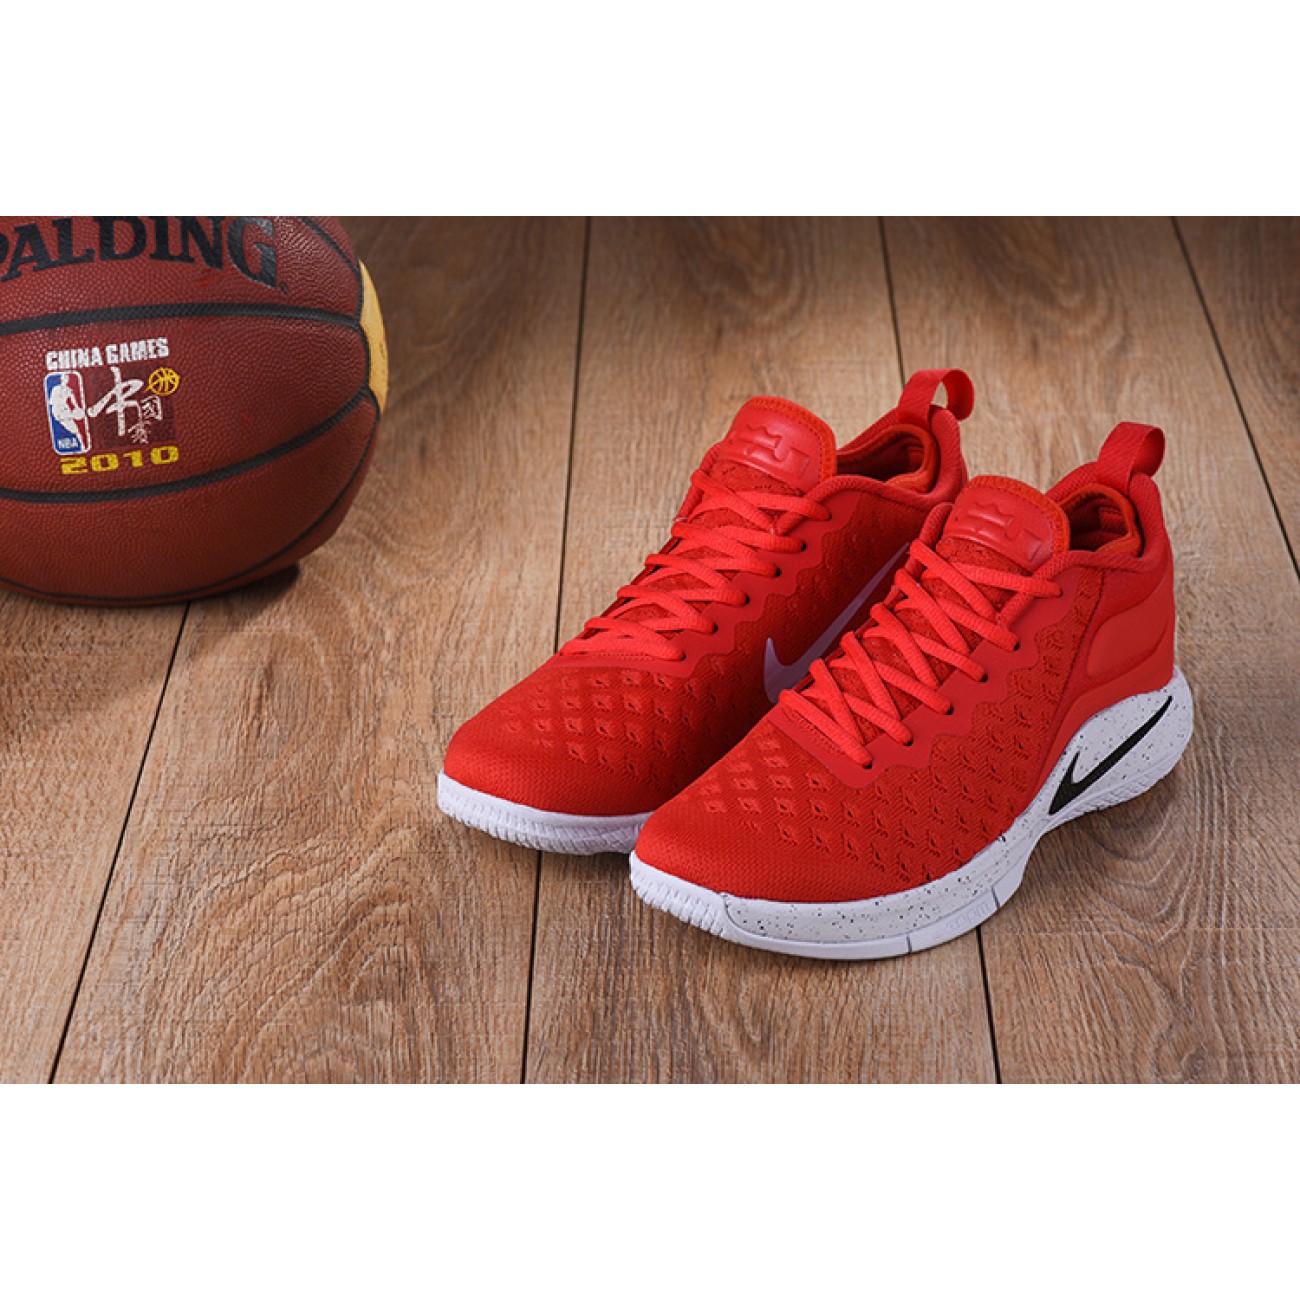 Lebron Witness 2 Flyknit Basketball Shoes Red/White/Black